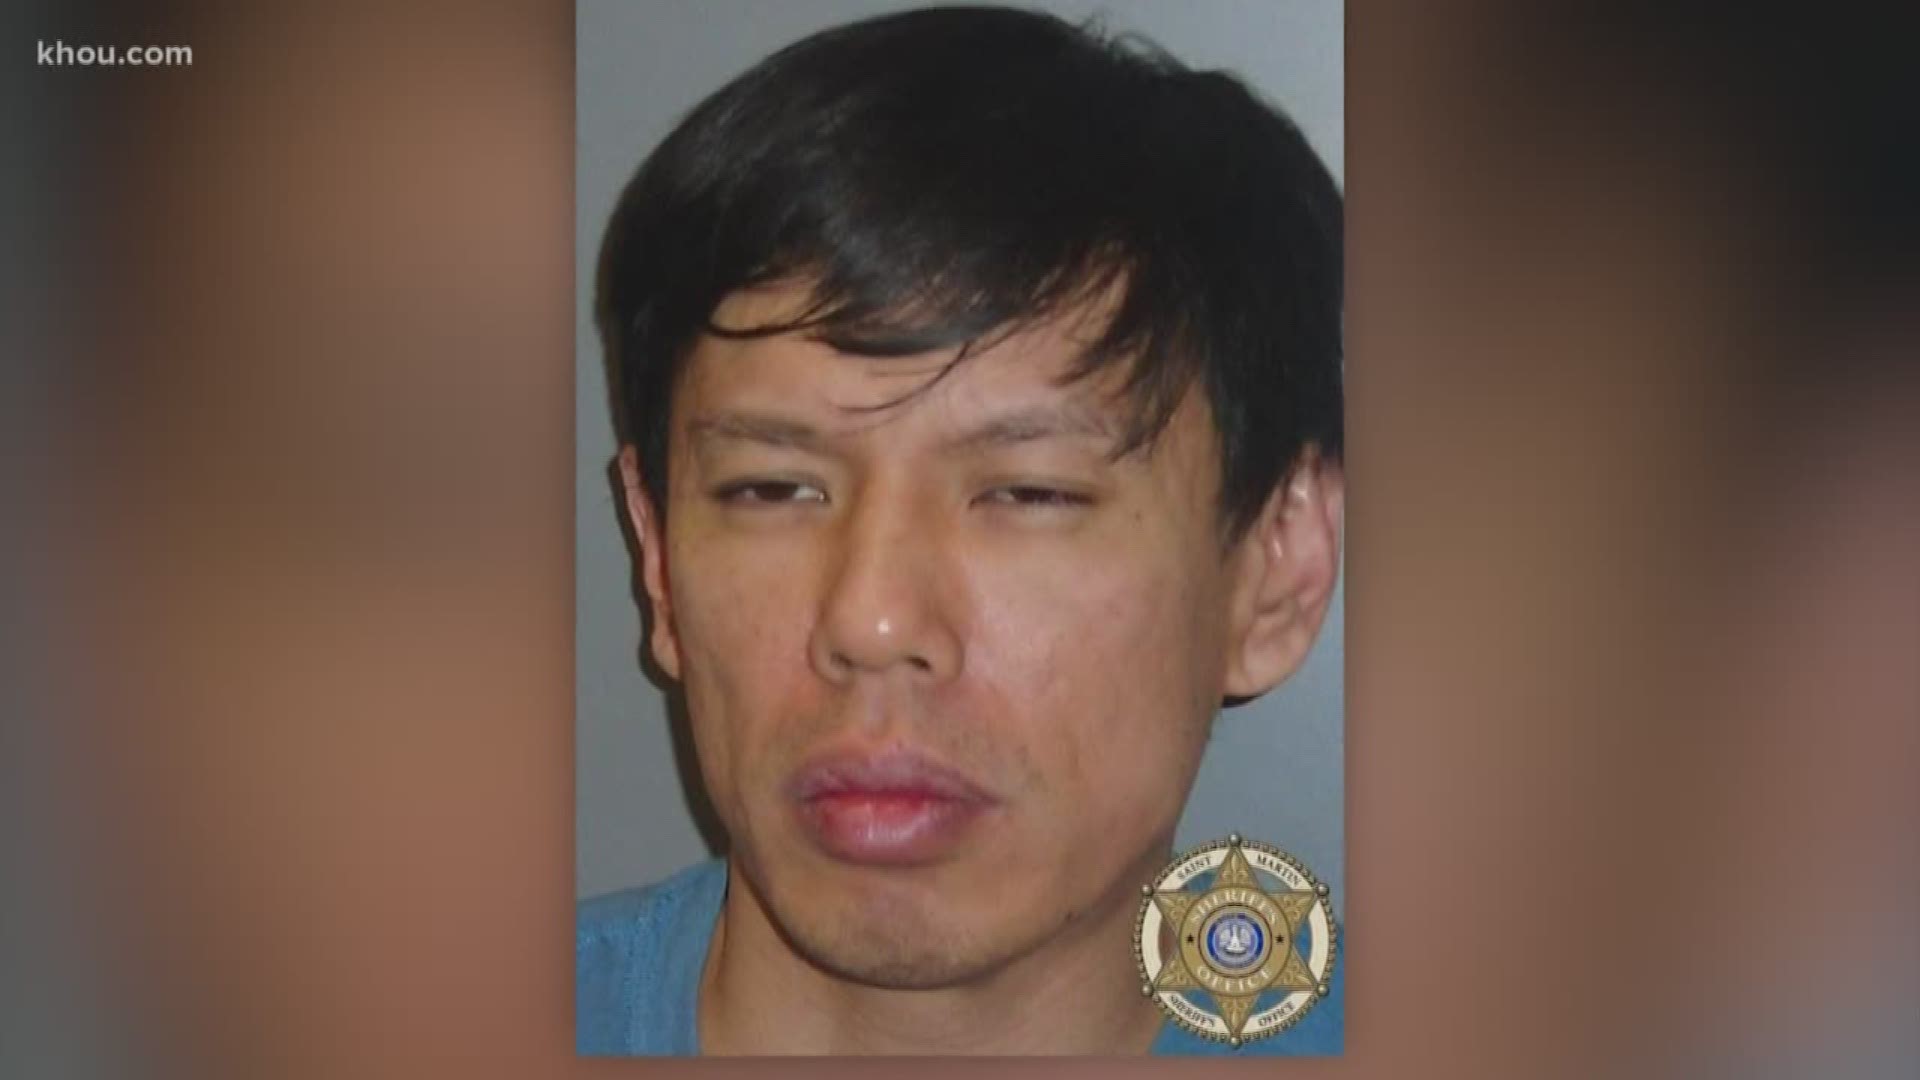 The Richmond man accused of killing his wife and fleeing the state with their two children was arrested overnight in Louisiana, deputies confirm.